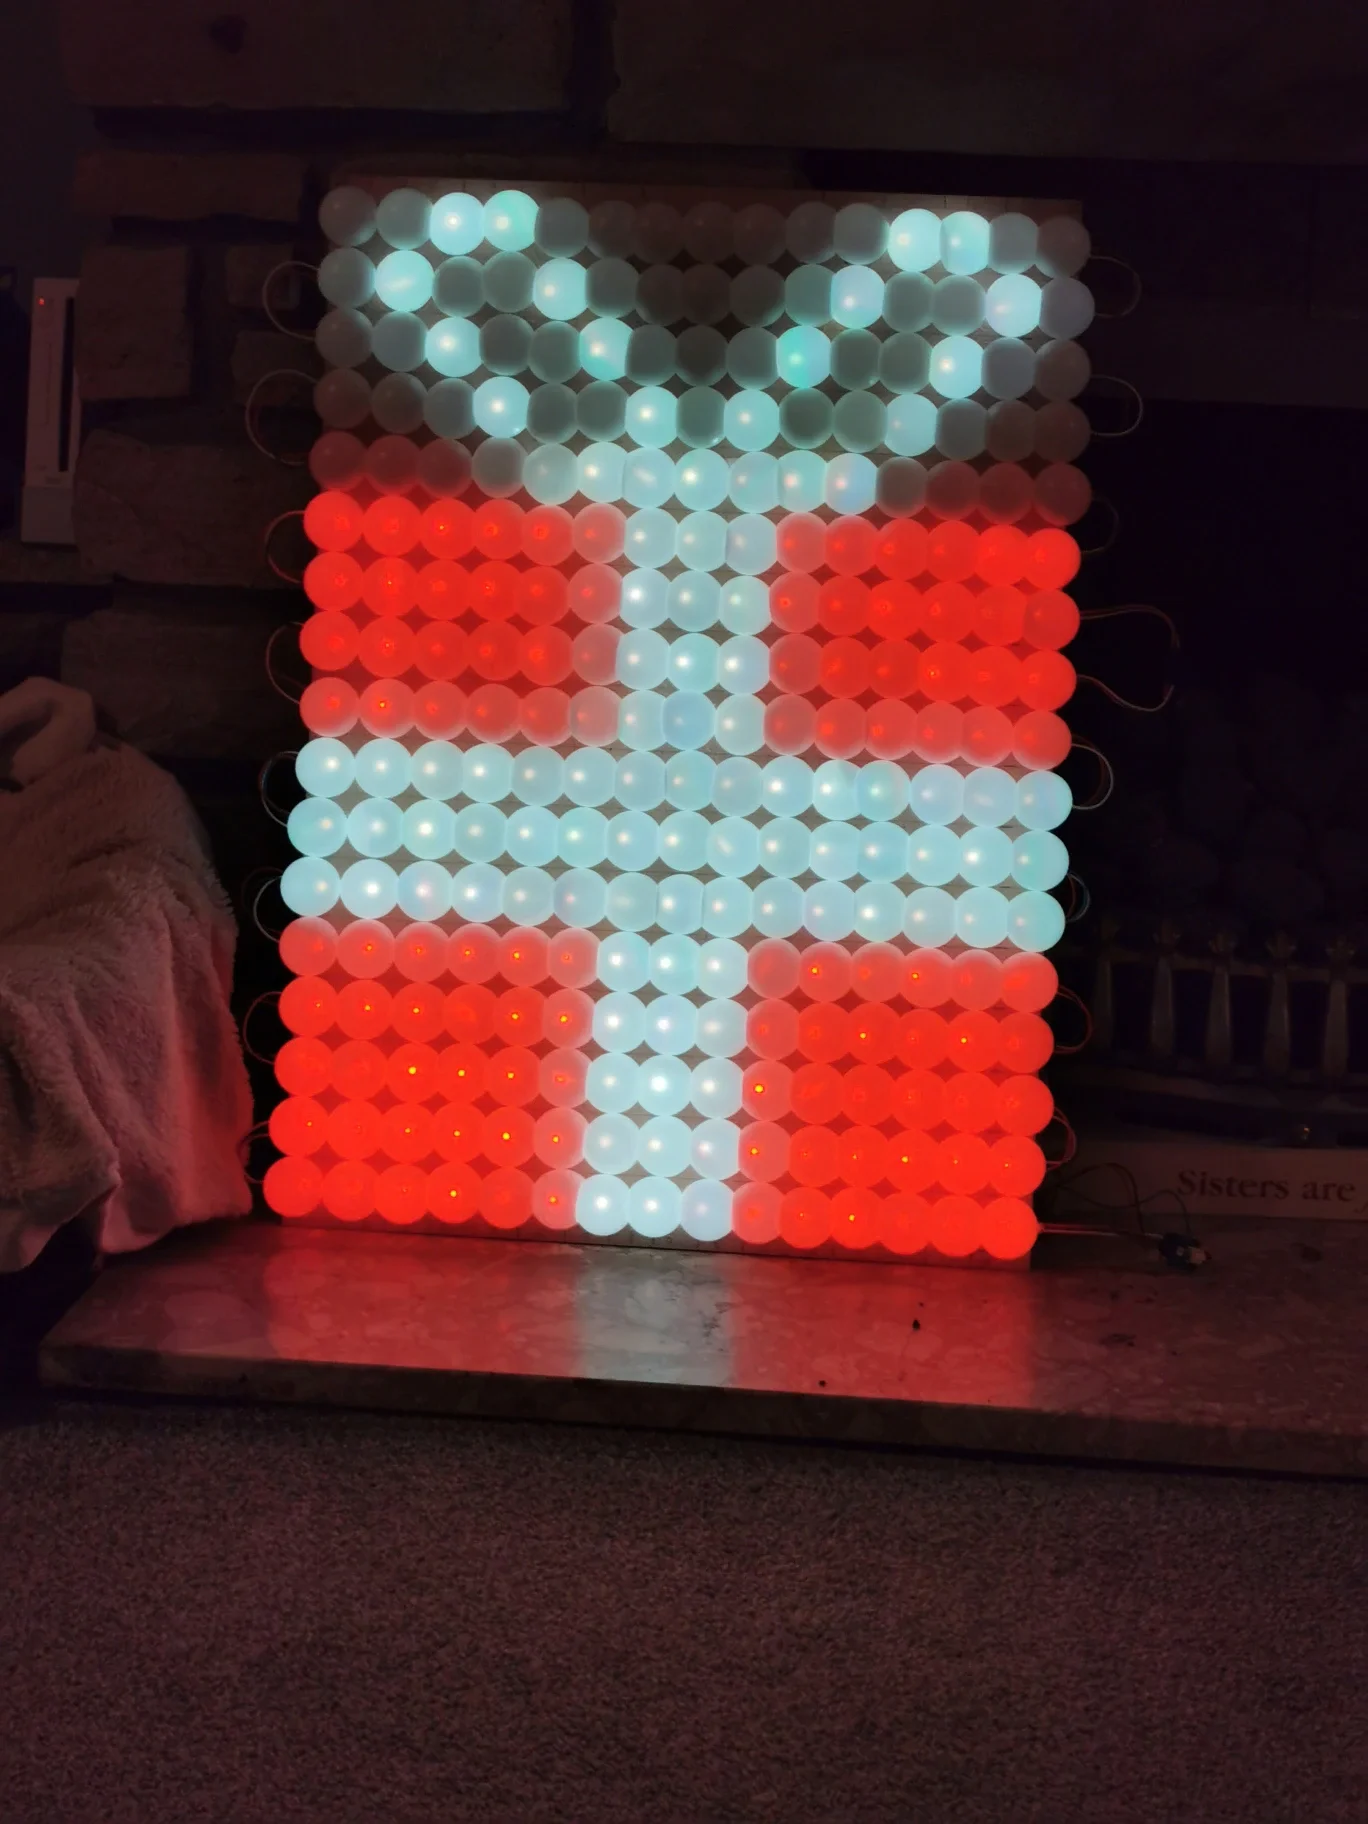 A Christmas gift in LED.